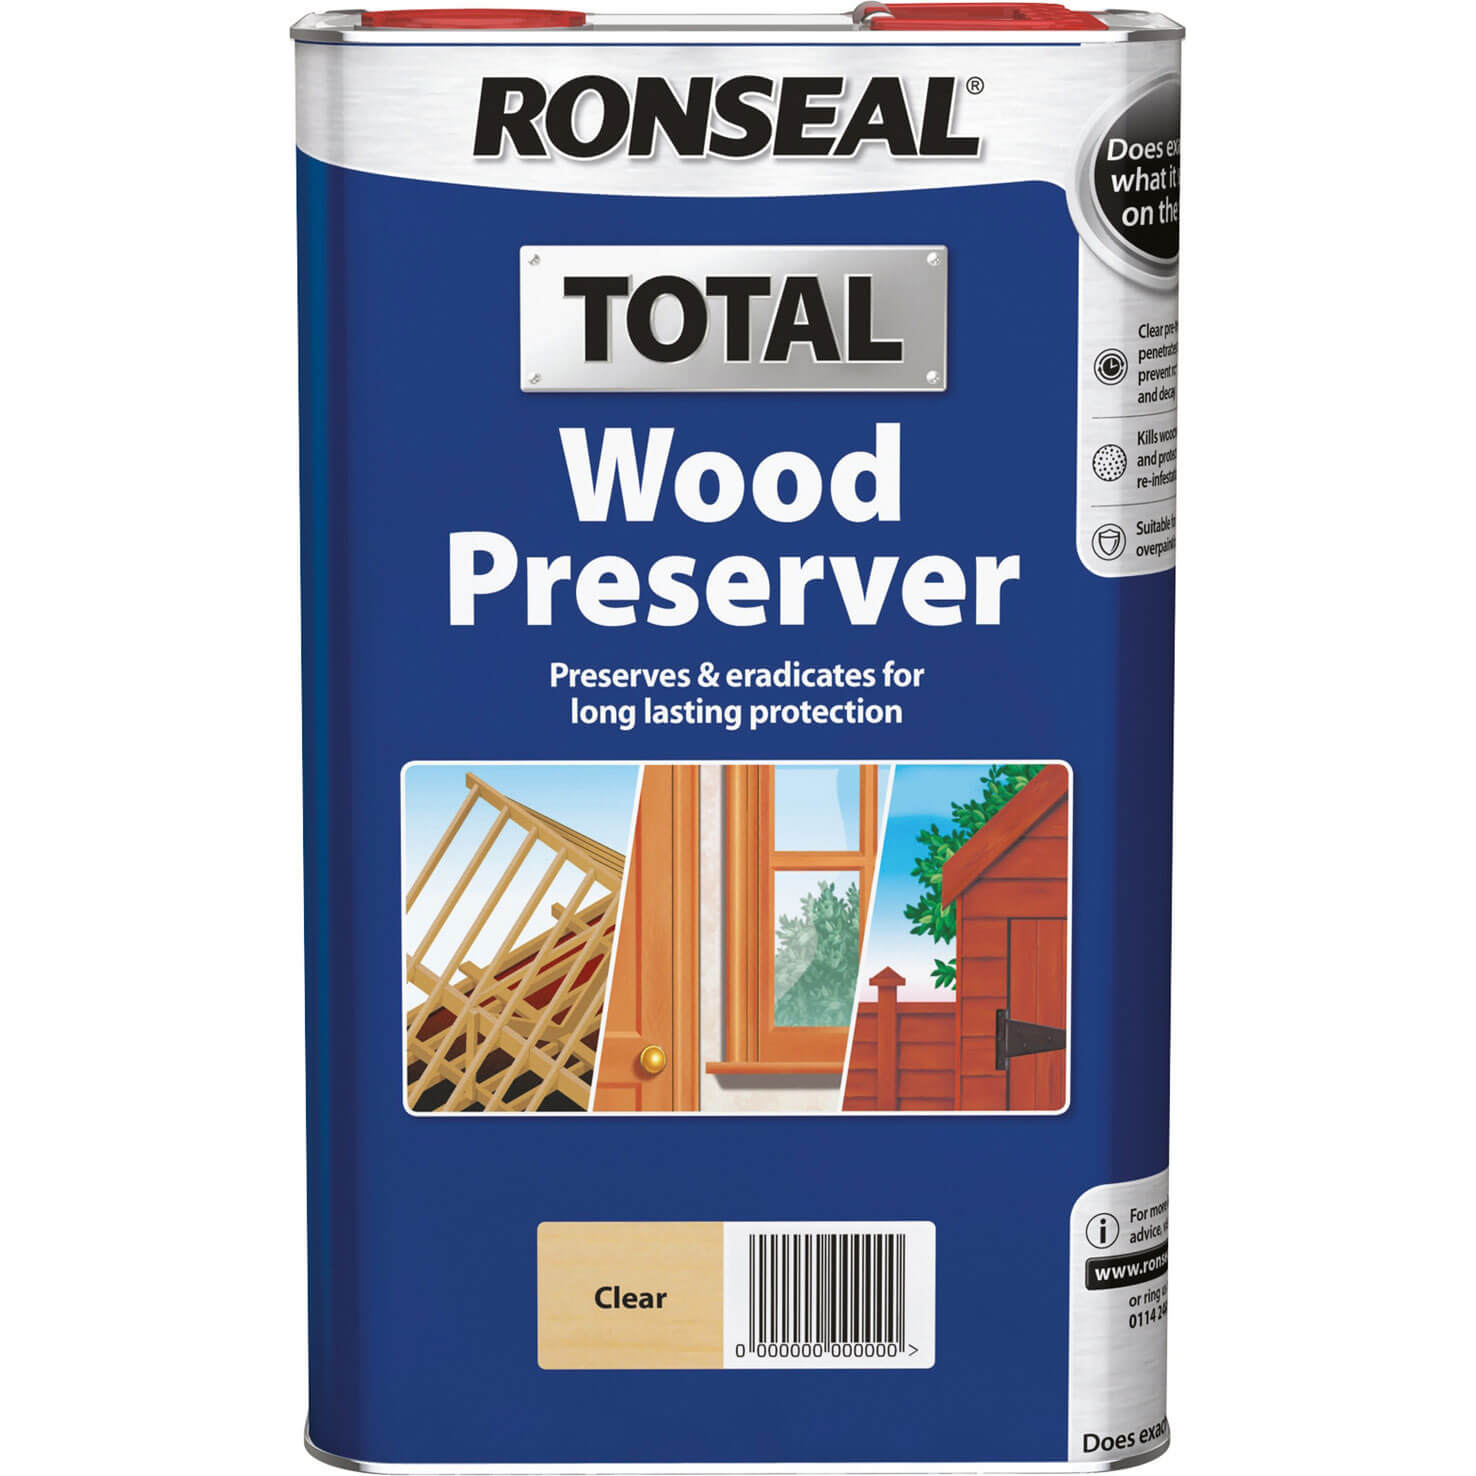 Ronseal Total Wood Preserver Clear 5l